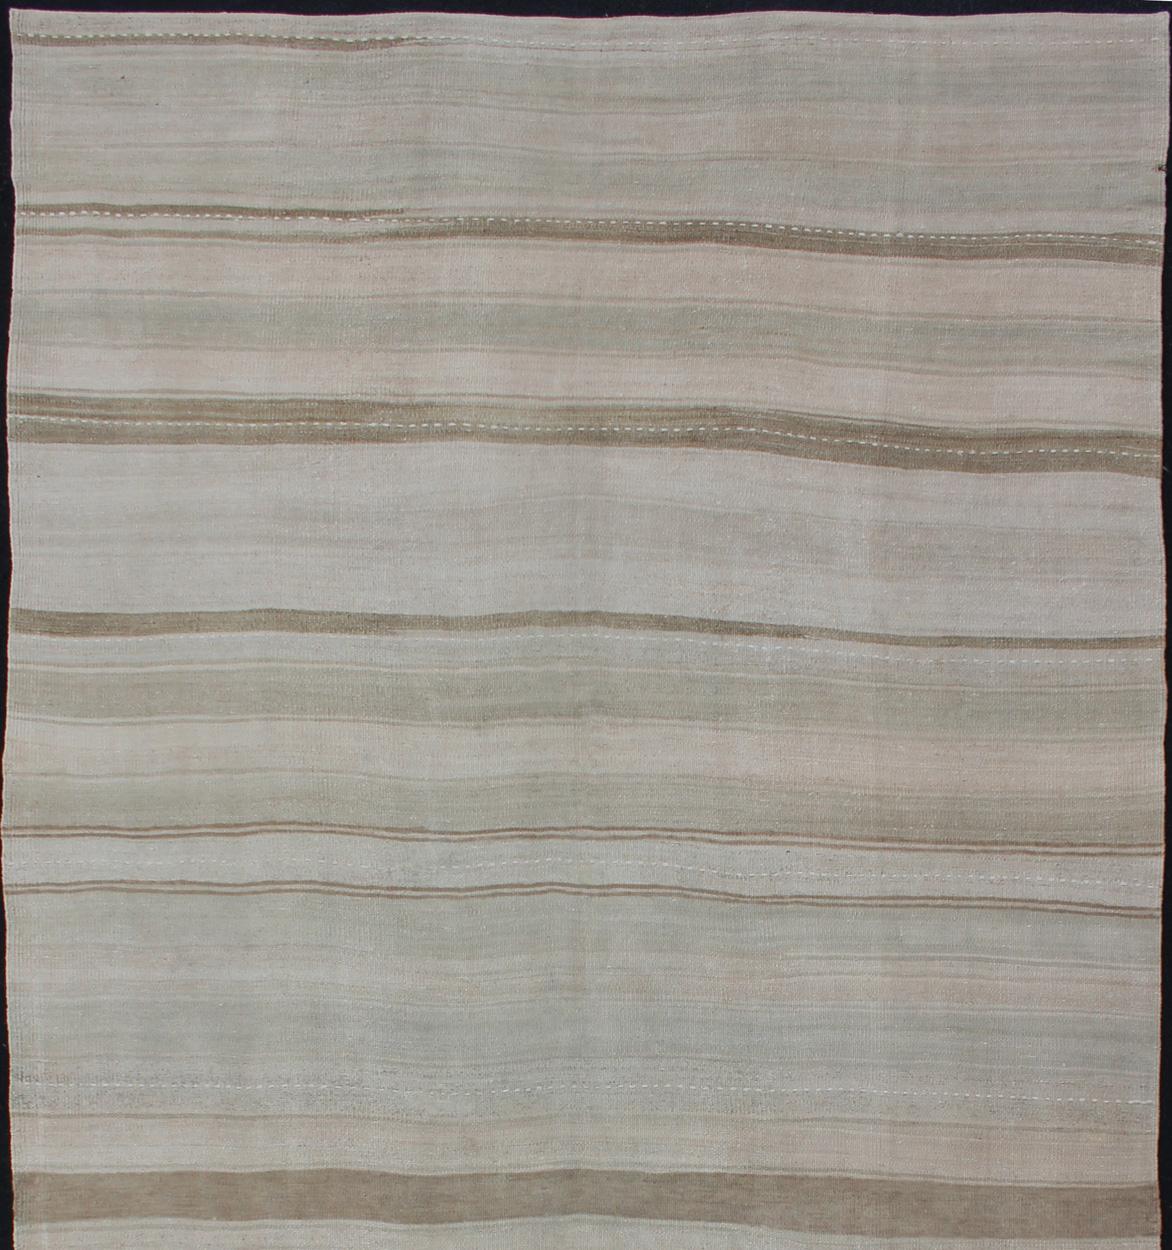 Stripe design Kilim Gallery rug / runner in cream and taupe light camel and neutrals, rug EN-176882, country of origin / type: Turkey / Kilim, circa 1950

This flat-woven Kilim gallery runner from Turkey features a neutral composition consisting